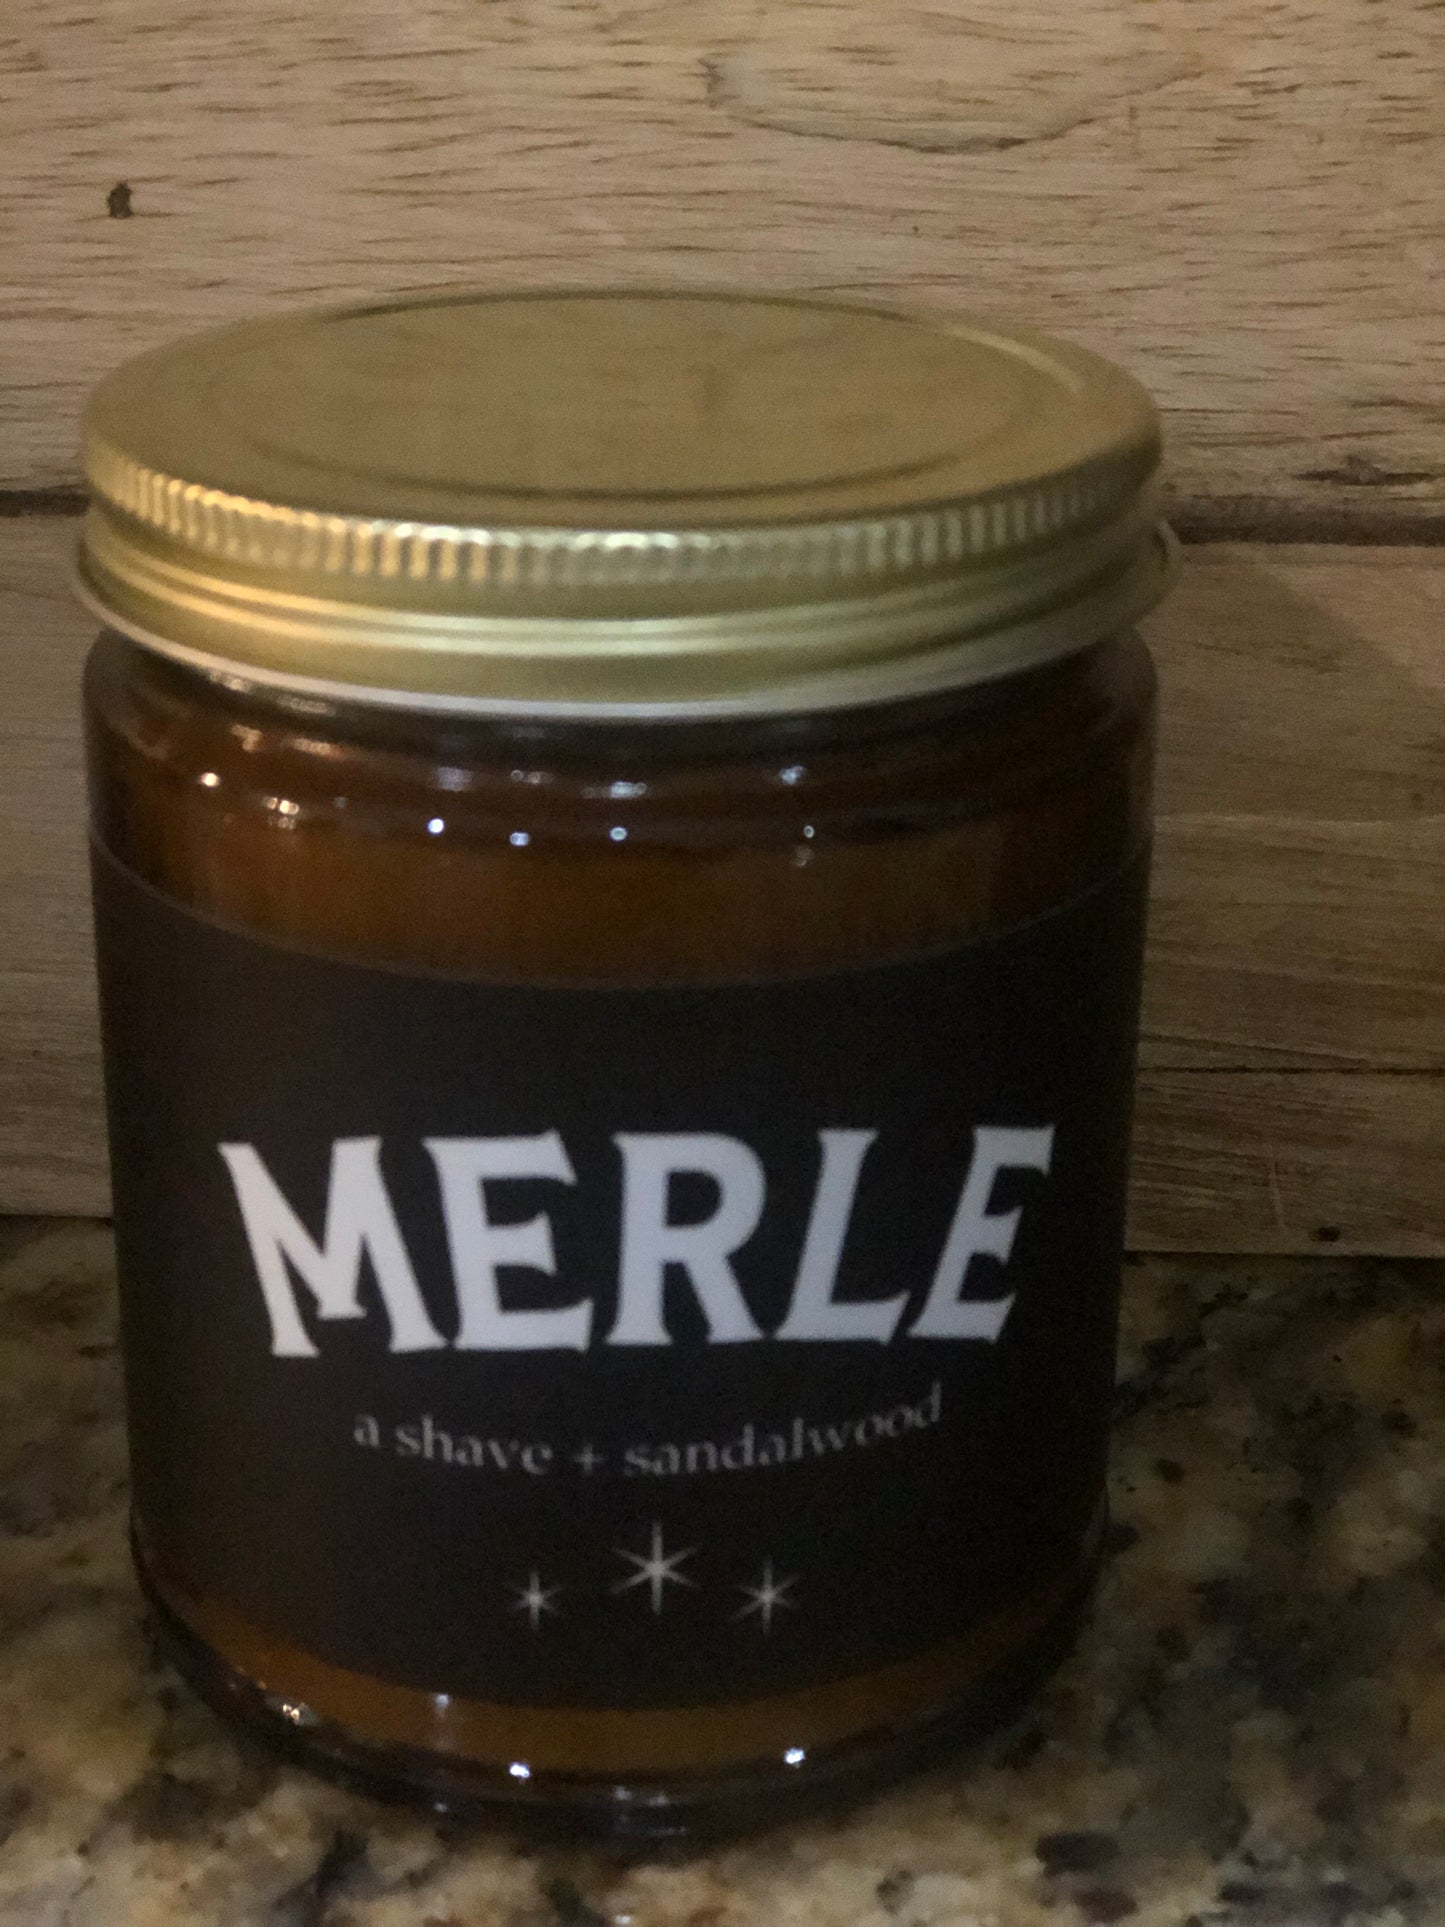 The Merle candle